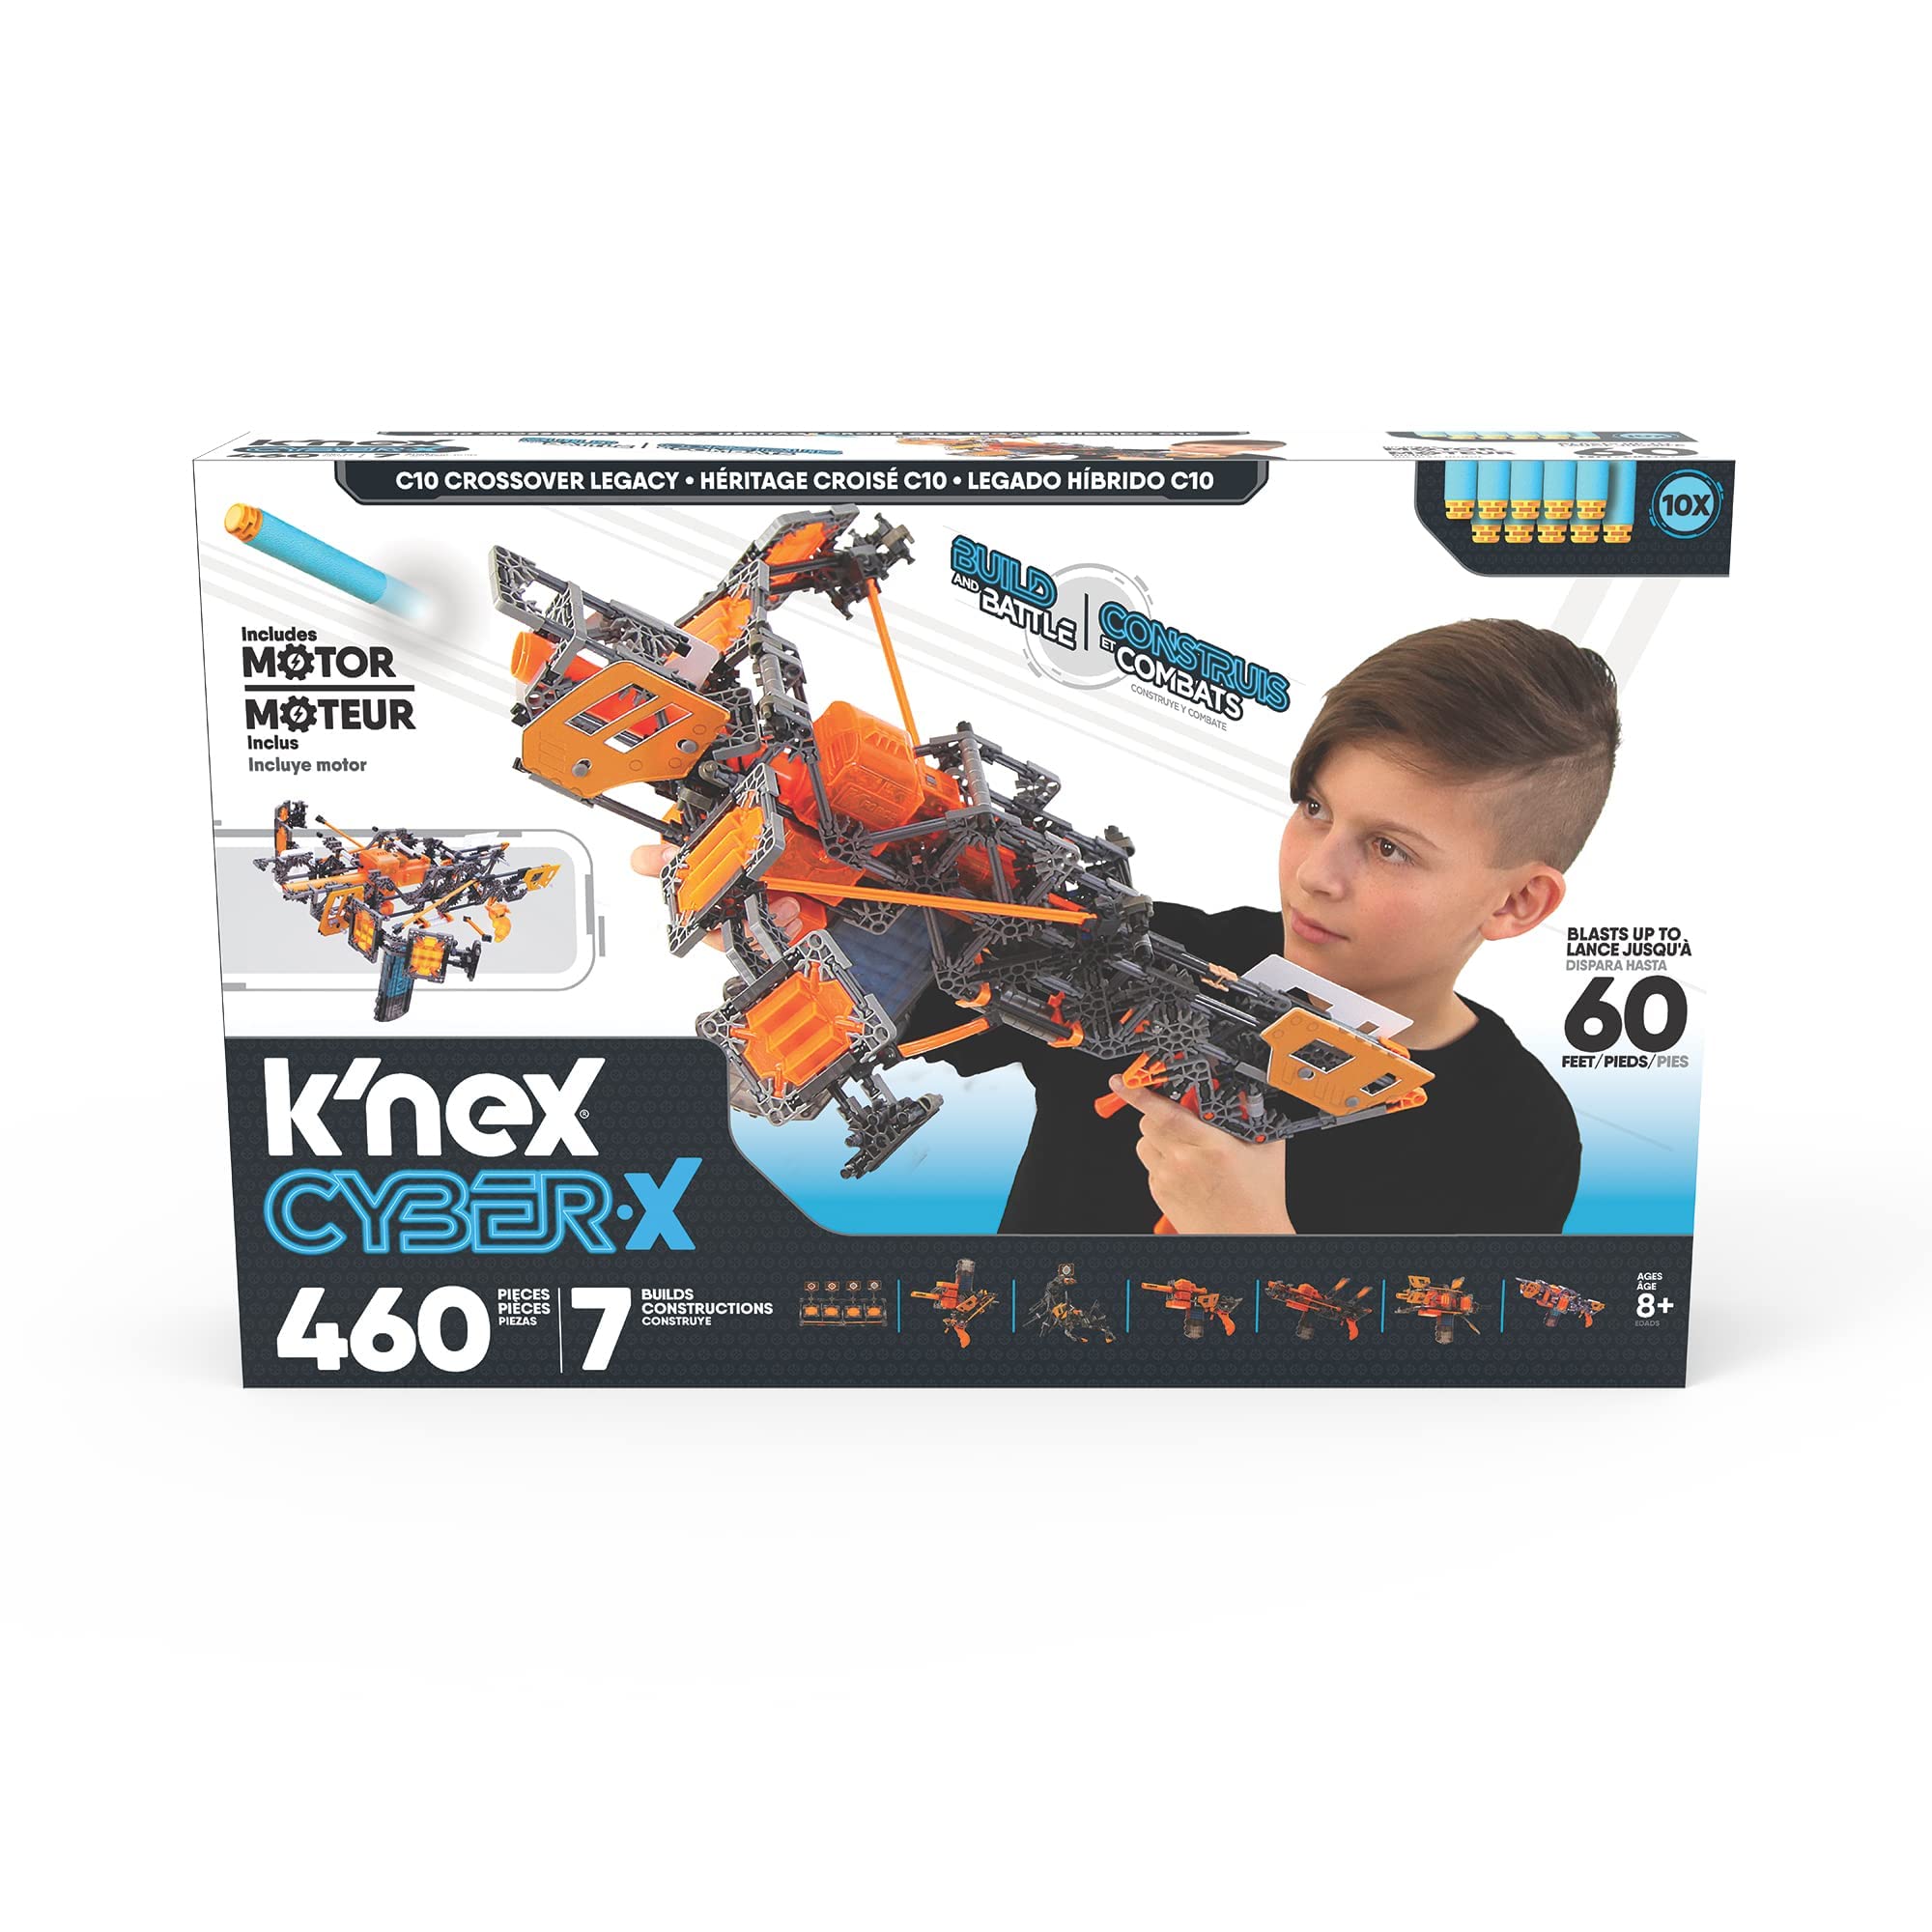 K'NEX Cyber-X C10 Crossover Legacy with Motor - Blasts up to 60 ft - 460 Pieces, 7 Builds, Targets, 10 Darts - Great Gift Kids 8+